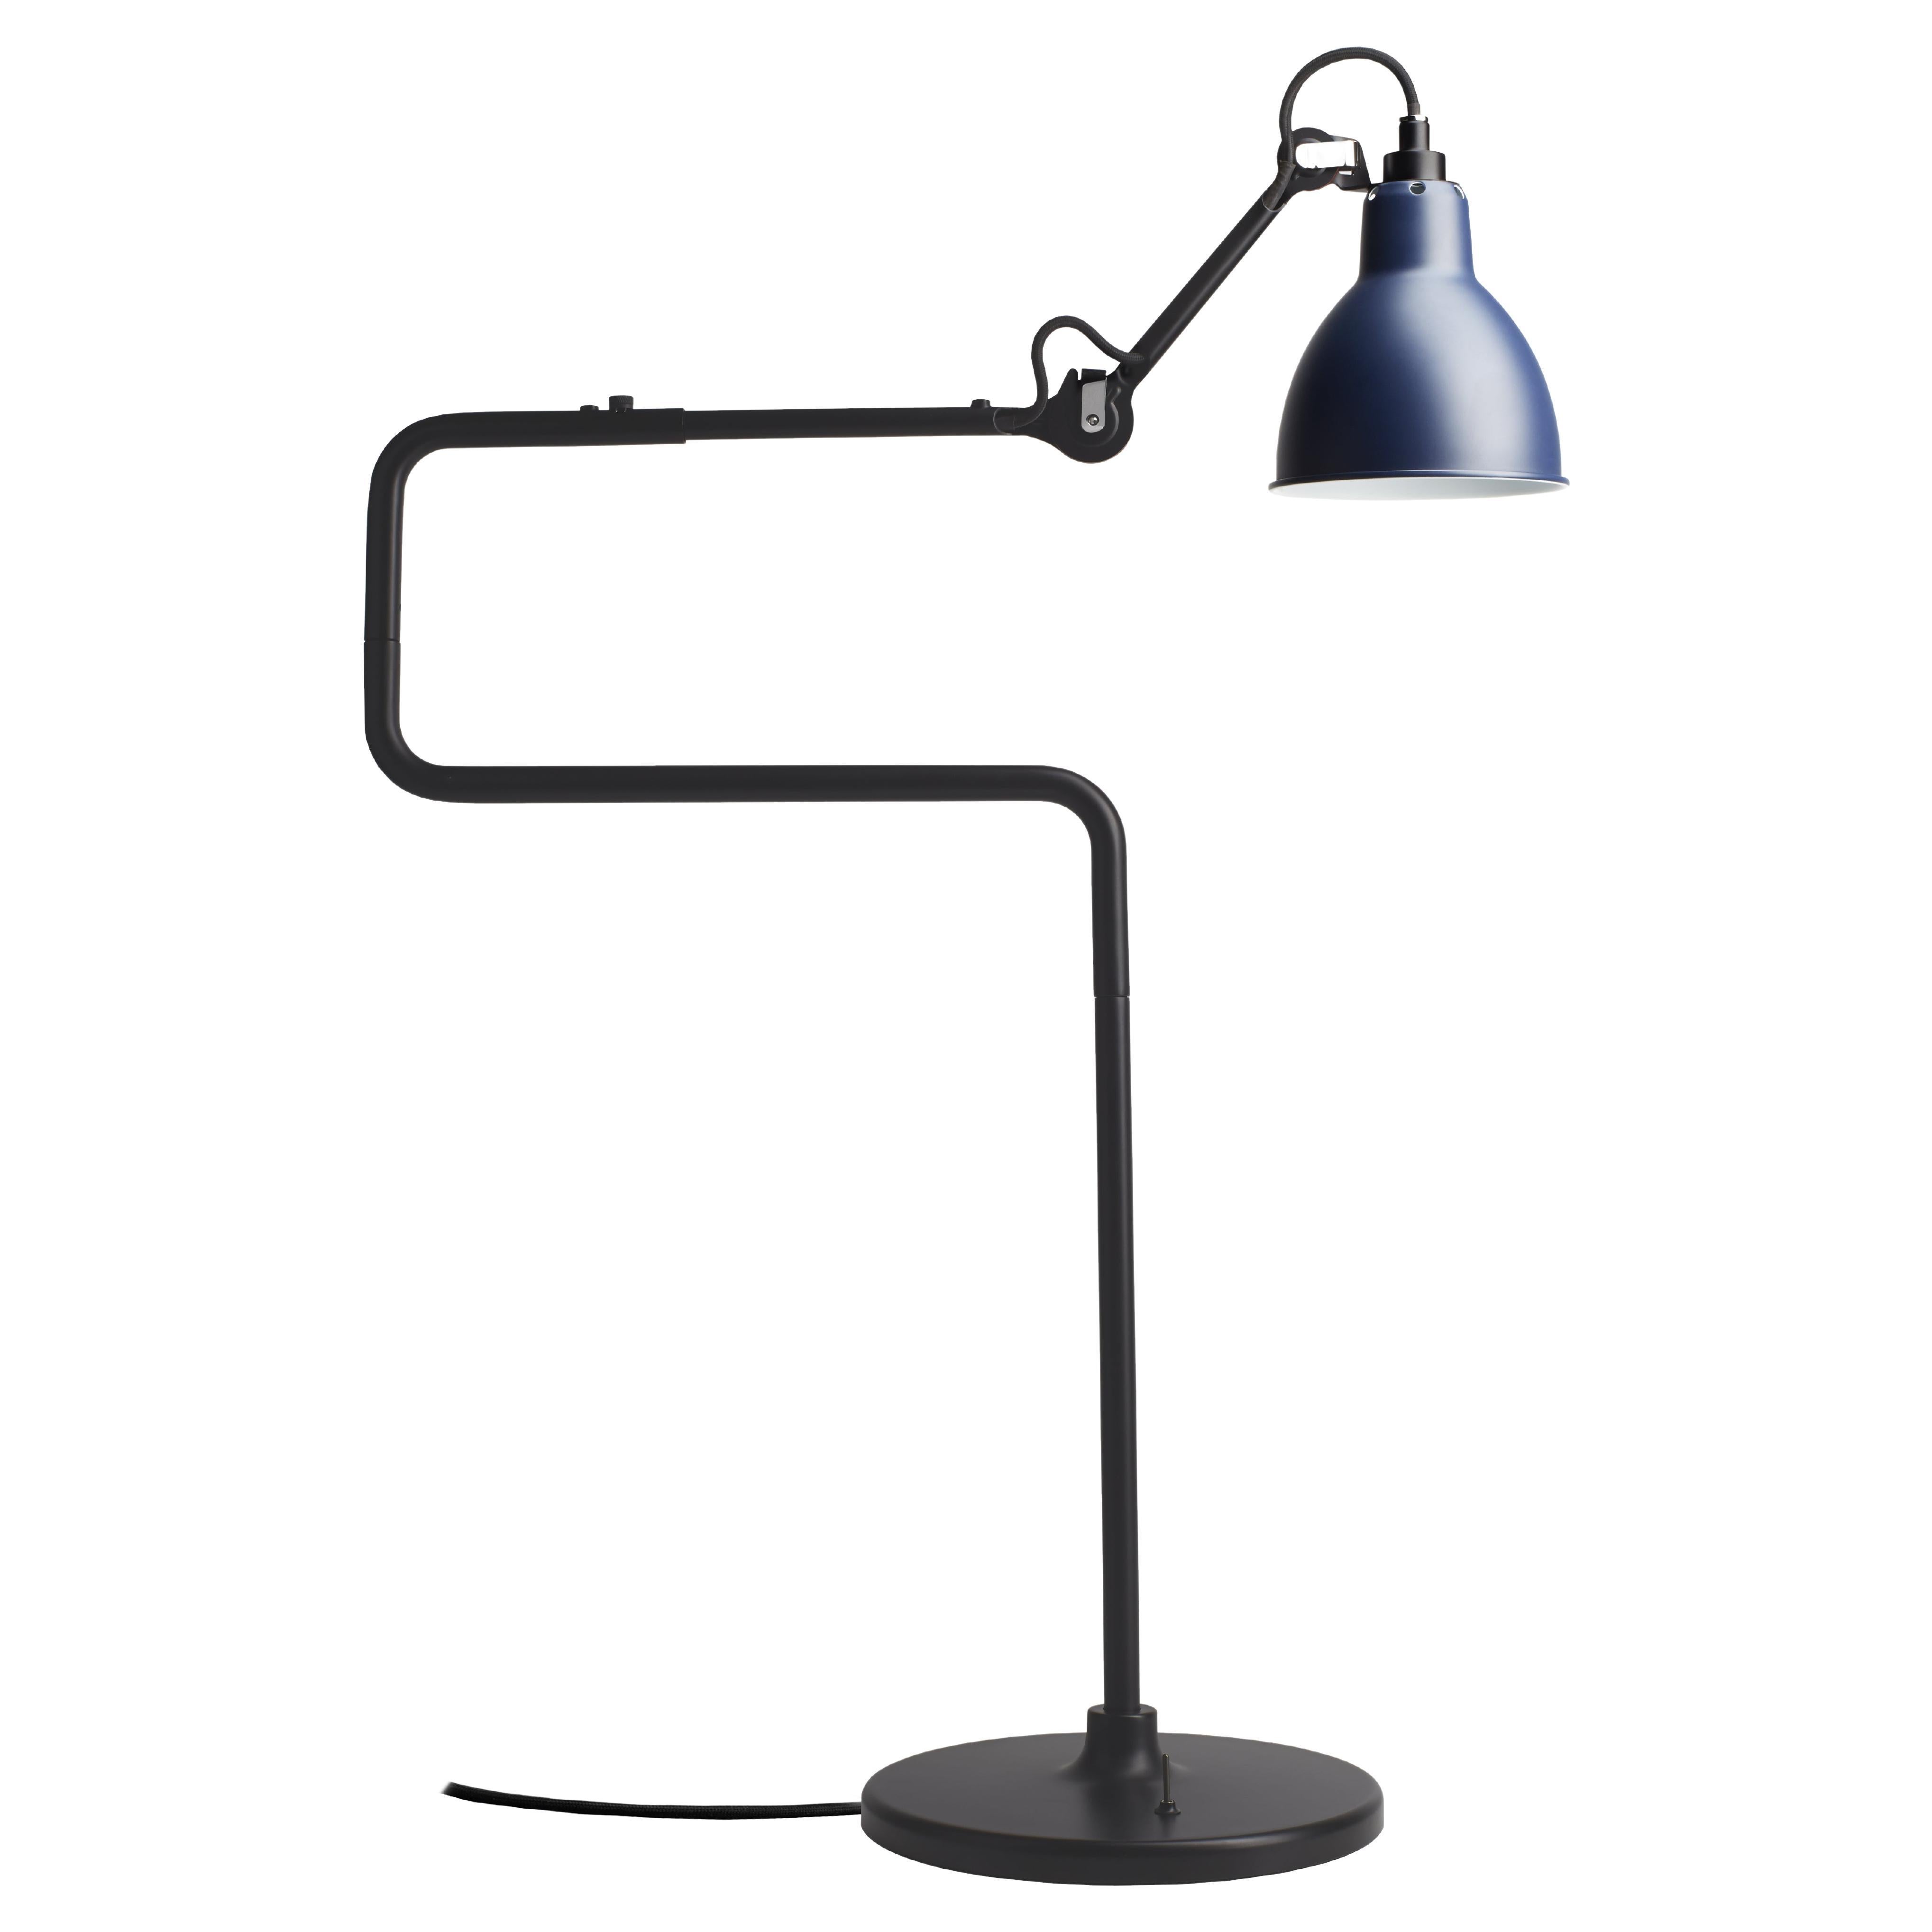 DCW Editions La Lampe Gras N°317 Table Lamp in Black Arm with Blue Shade For Sale